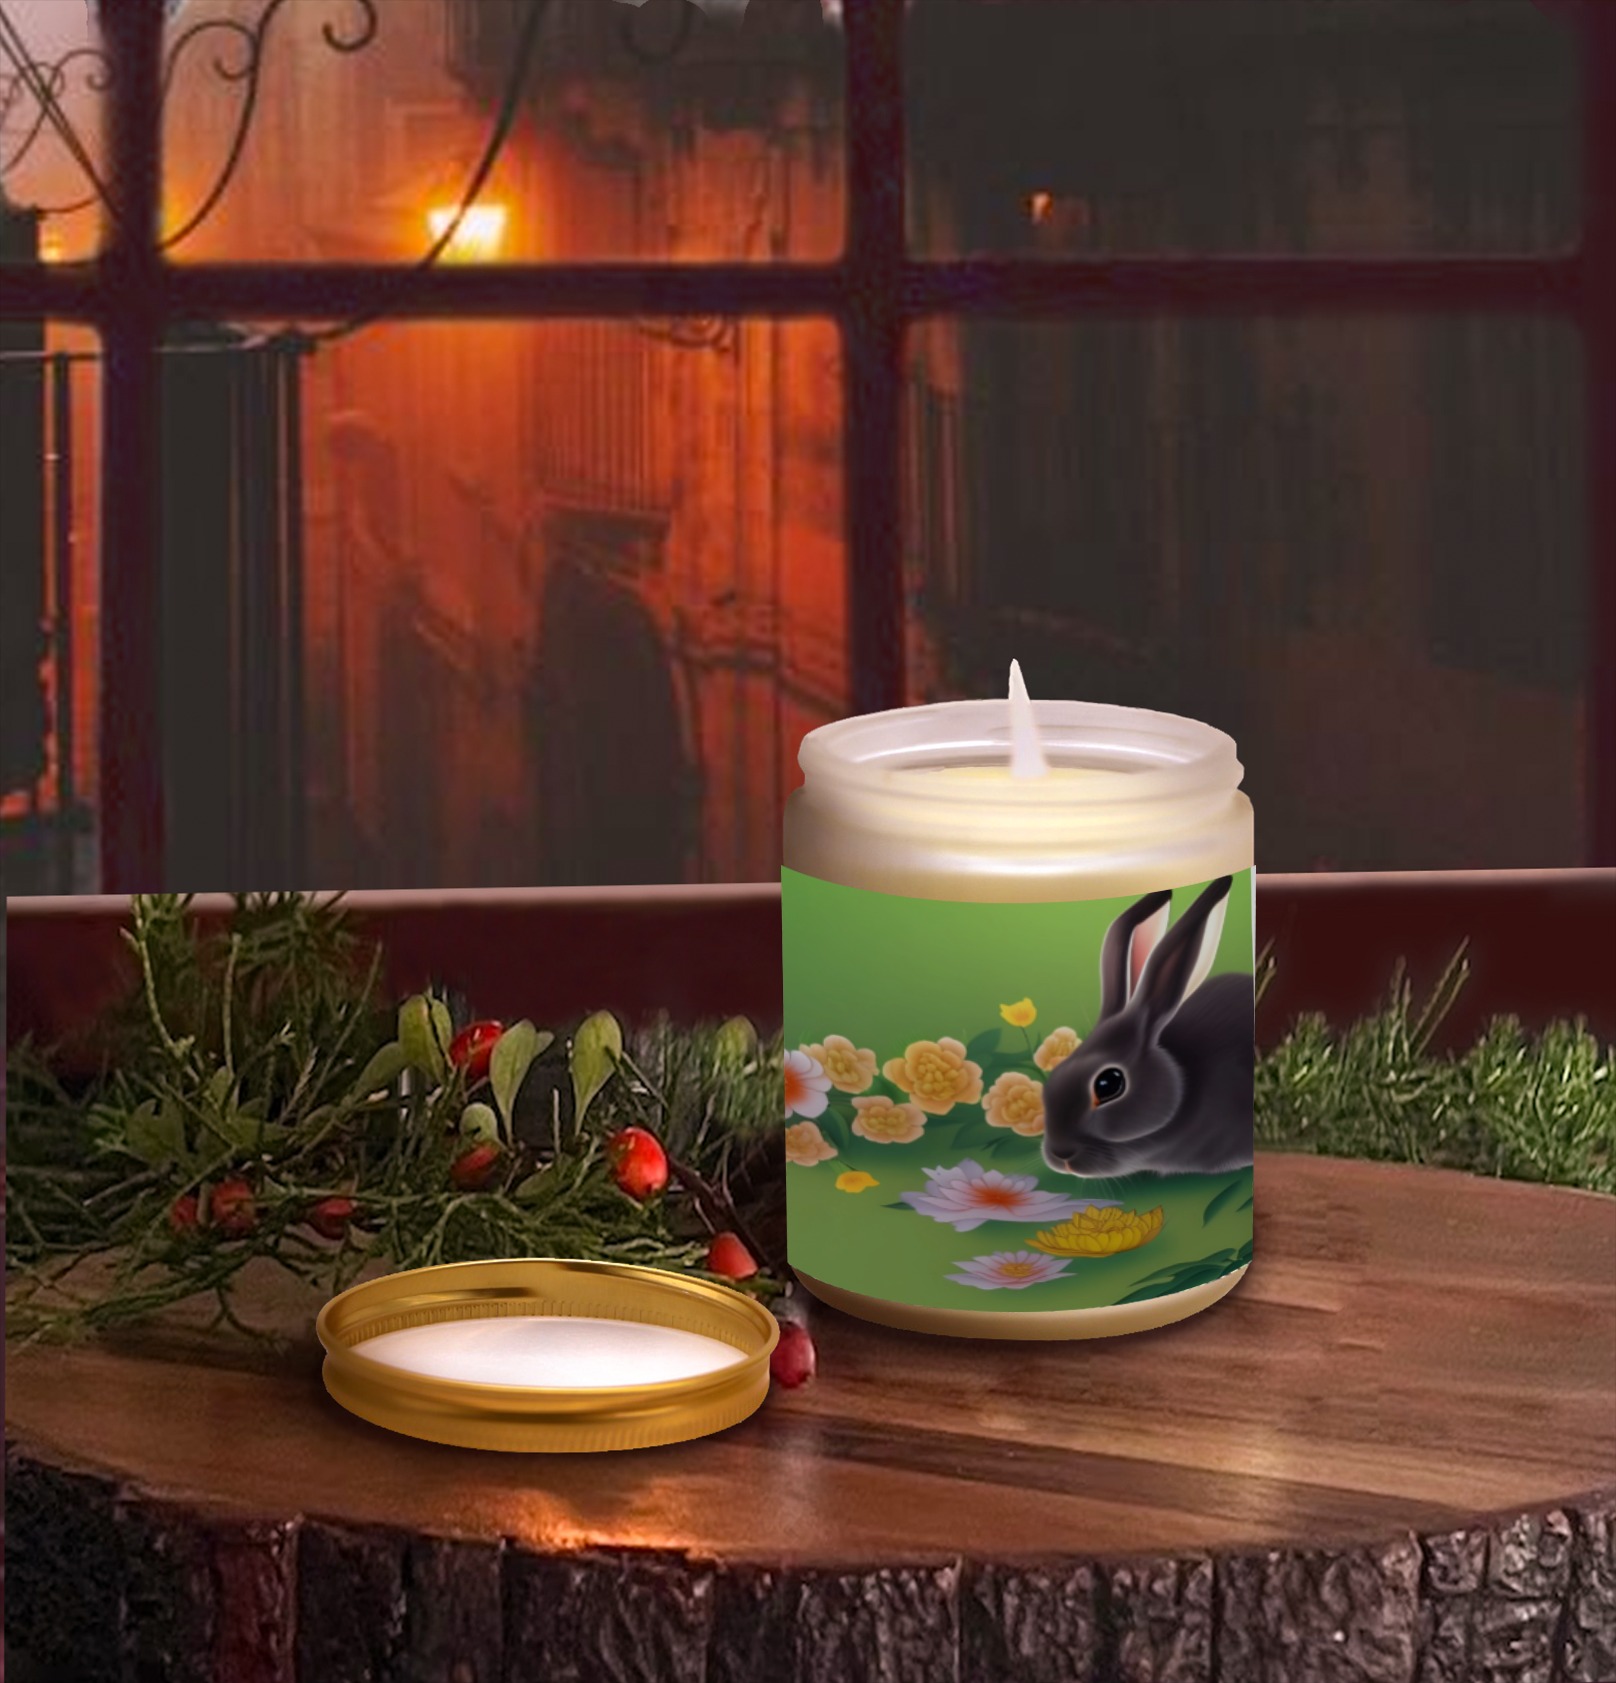 Rabbit and Flowers Frosted Glass Candle Cup - Large Size (Lavender&Lemon)